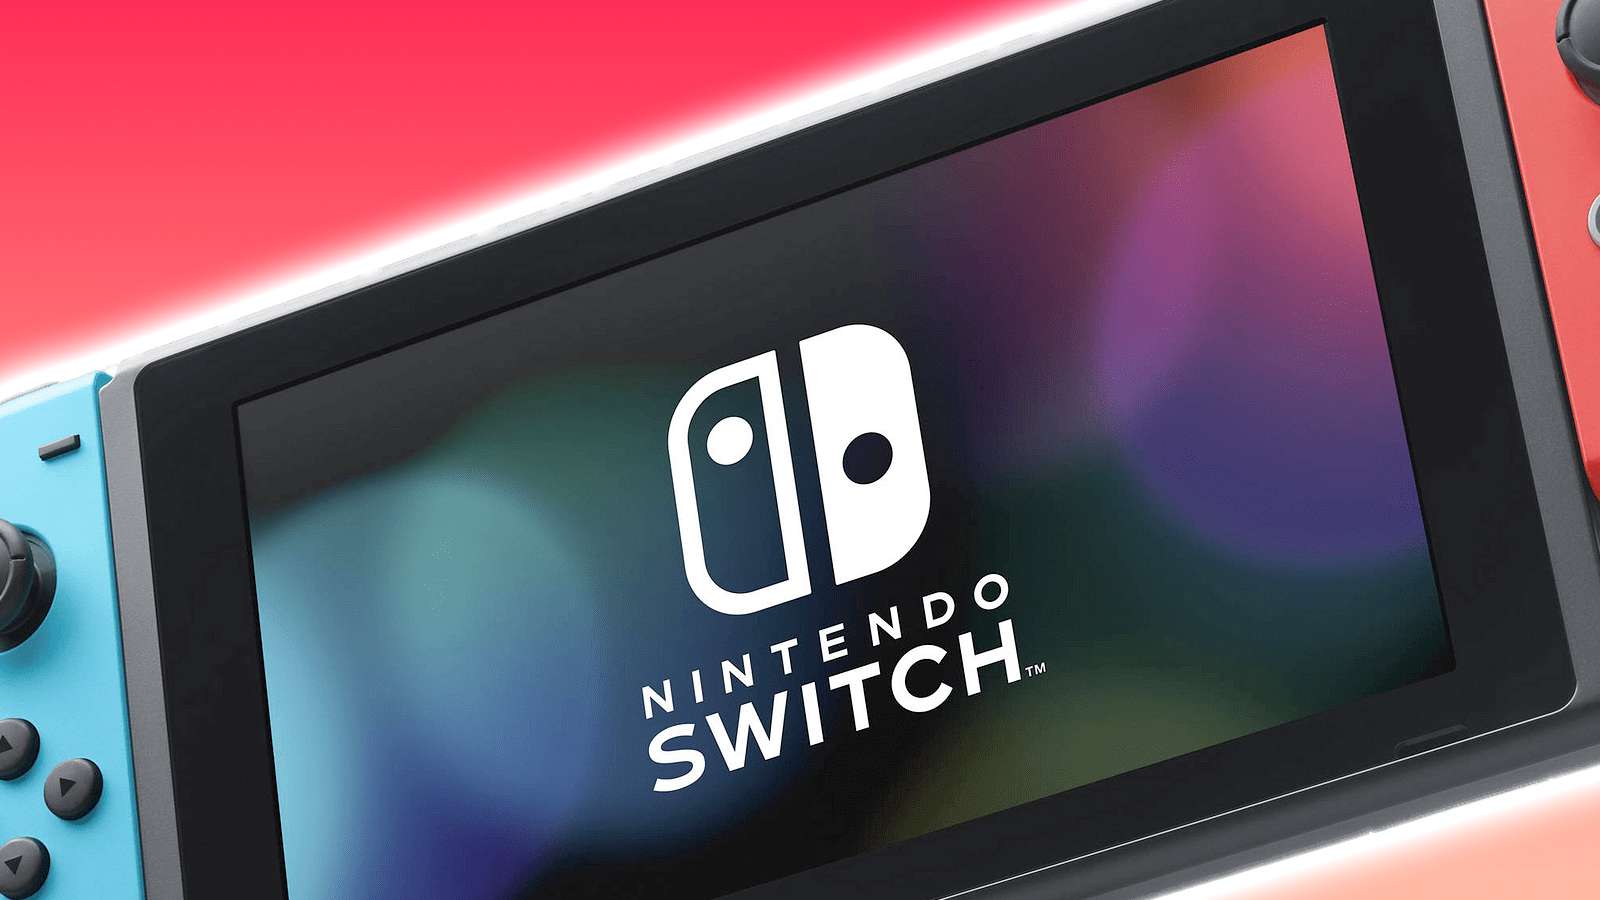 Save Your Nuts for Nintendo Switch - Nintendo Official Site